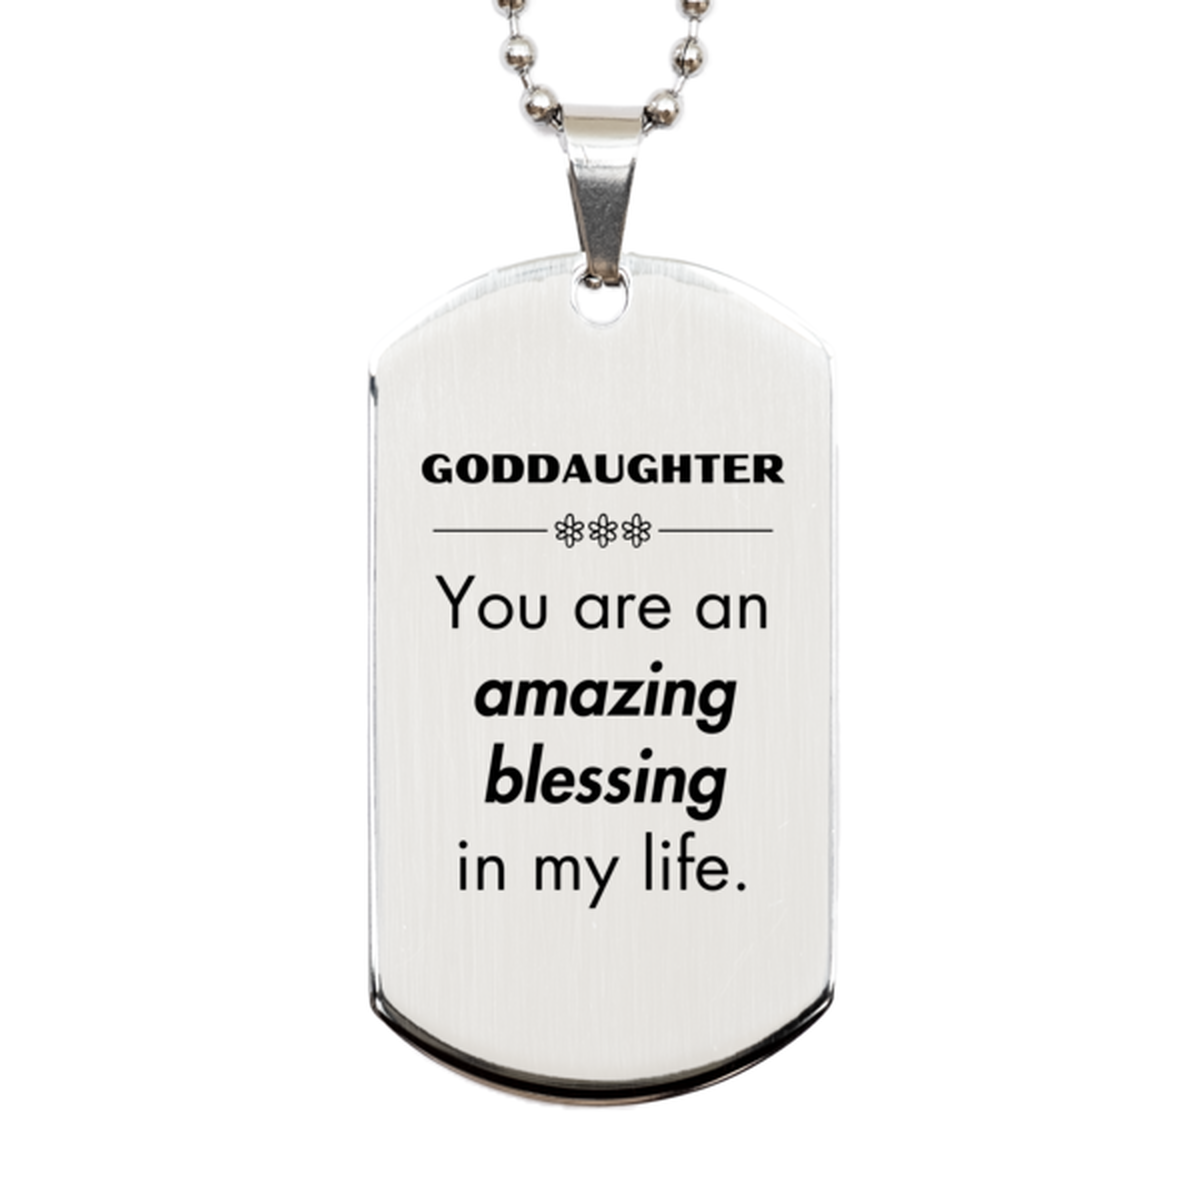 Goddaughter Silver Dog Tag, You are an amazing blessing in my life, Thank You Gifts For Goddaughter, Inspirational Birthday Christmas Unique Gifts For Goddaughter